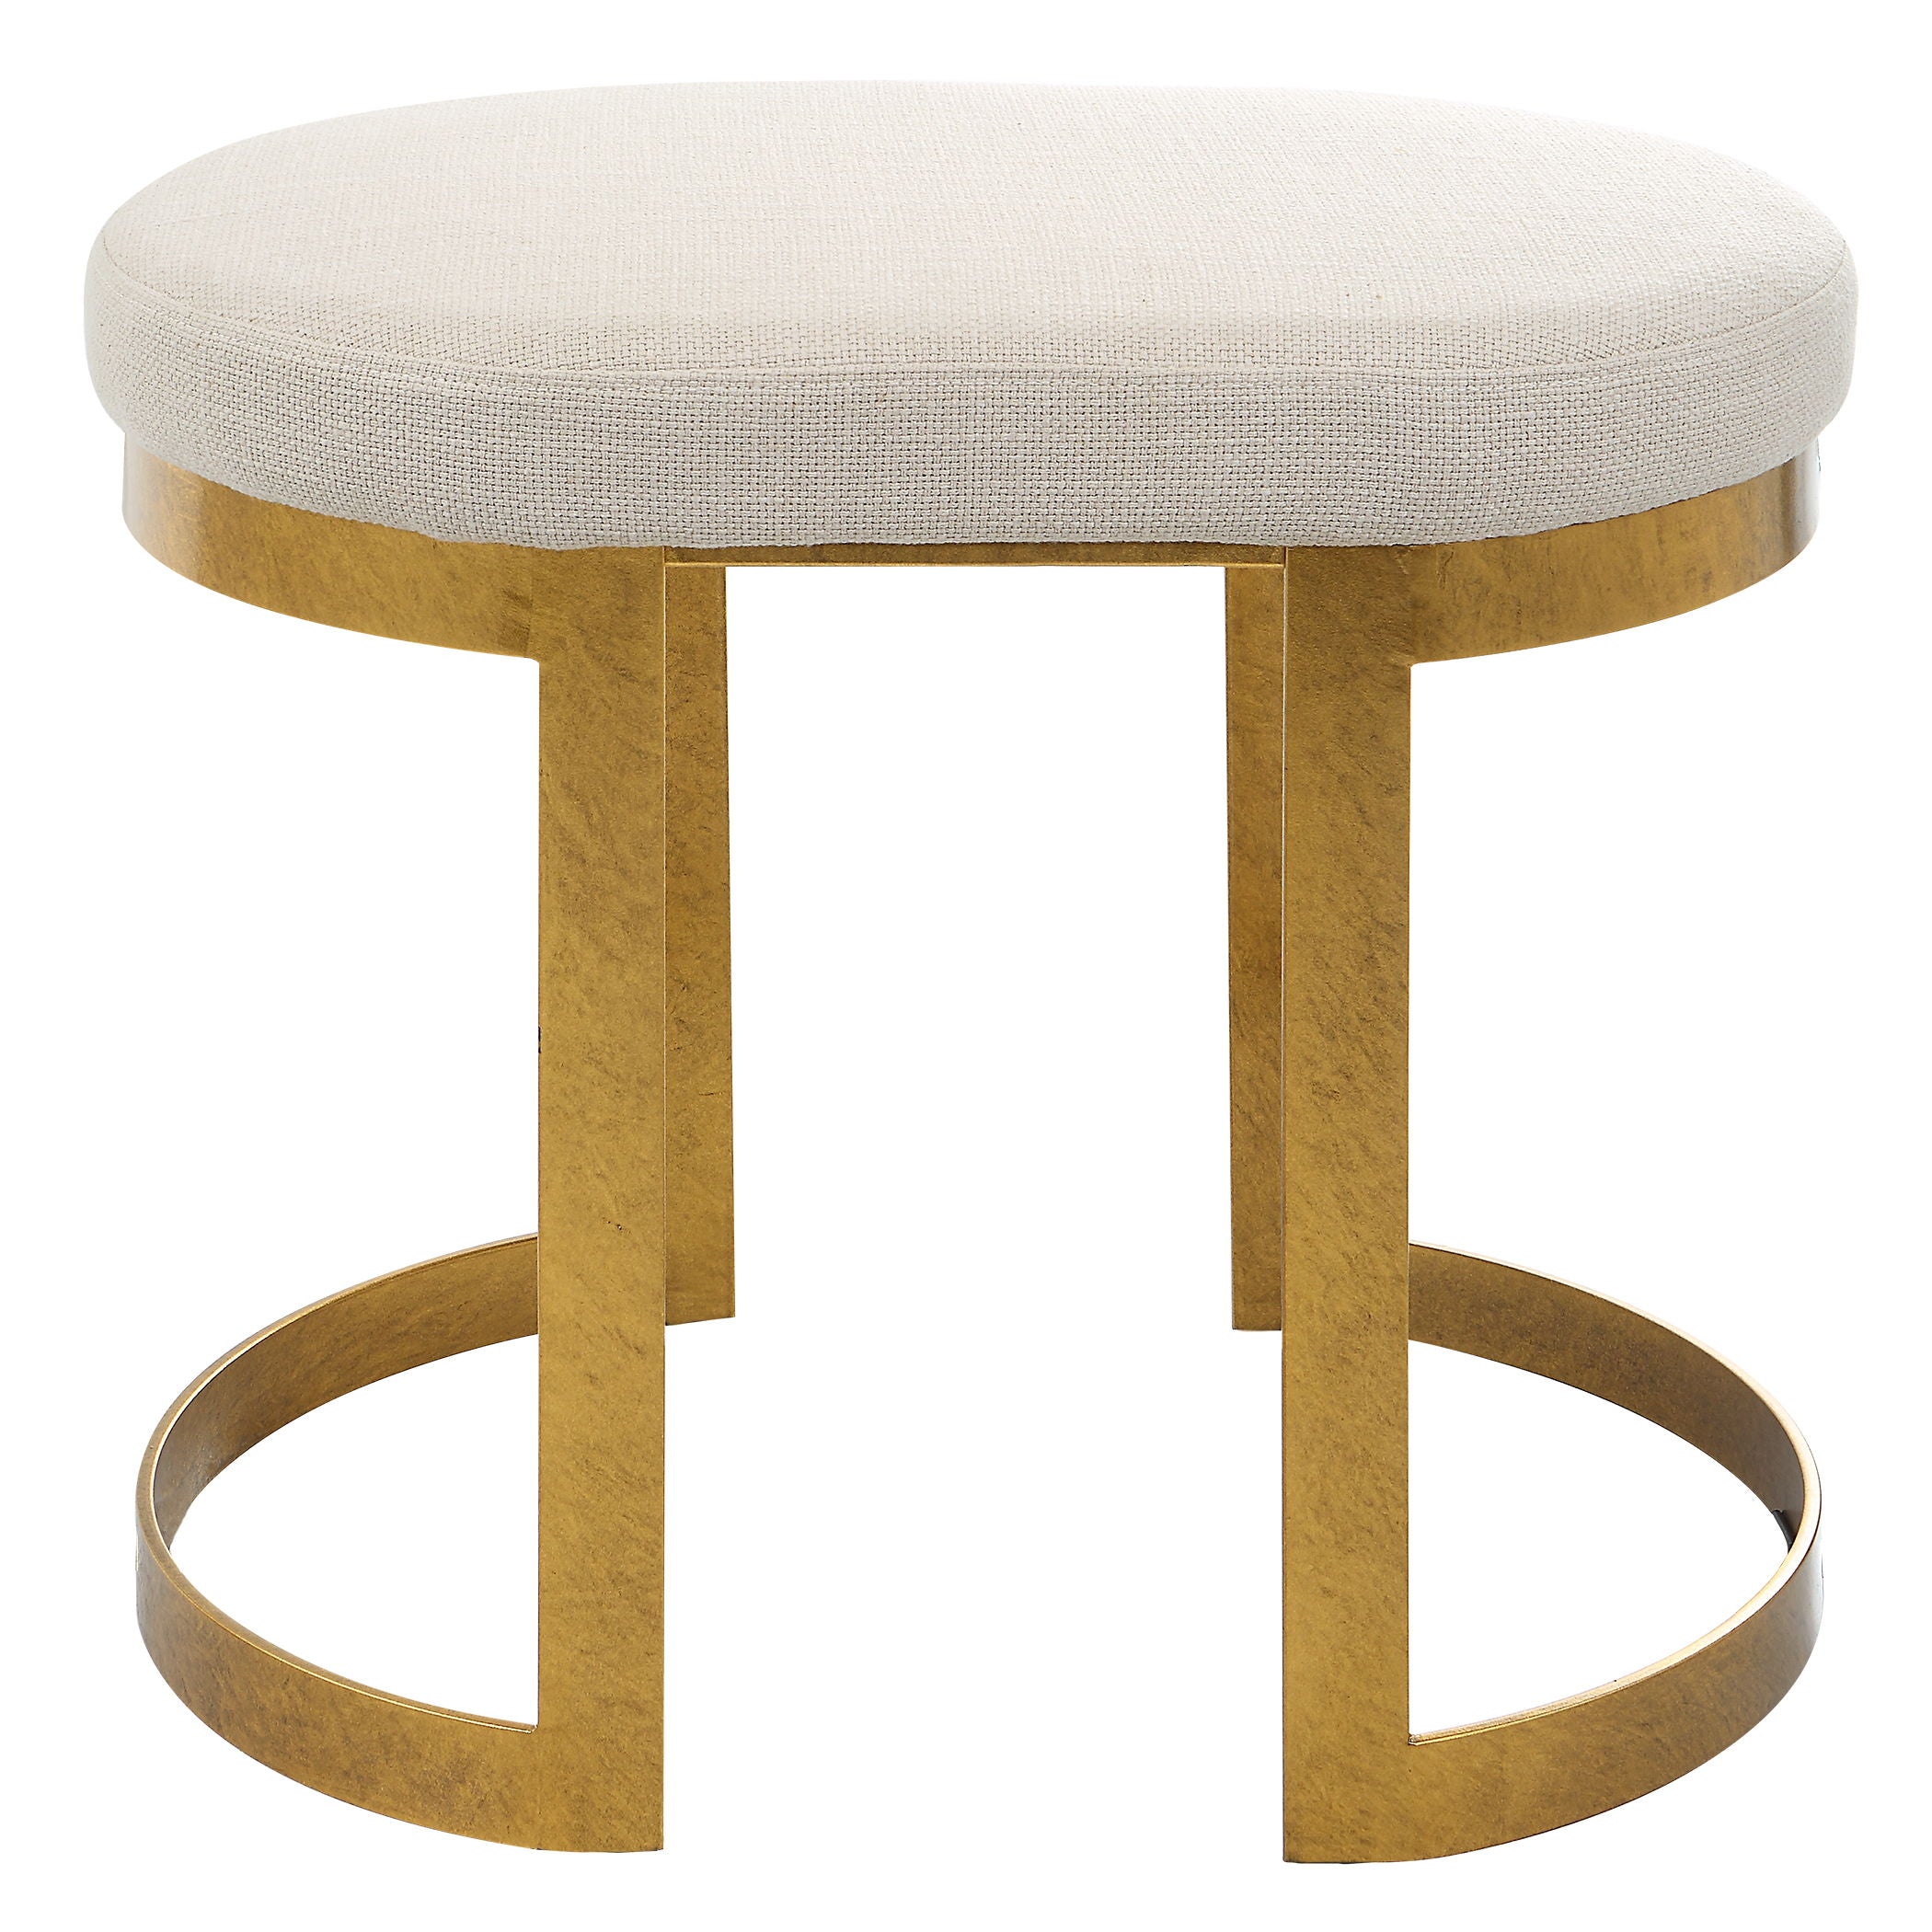 Infinity - Accent Stool - White & Gold